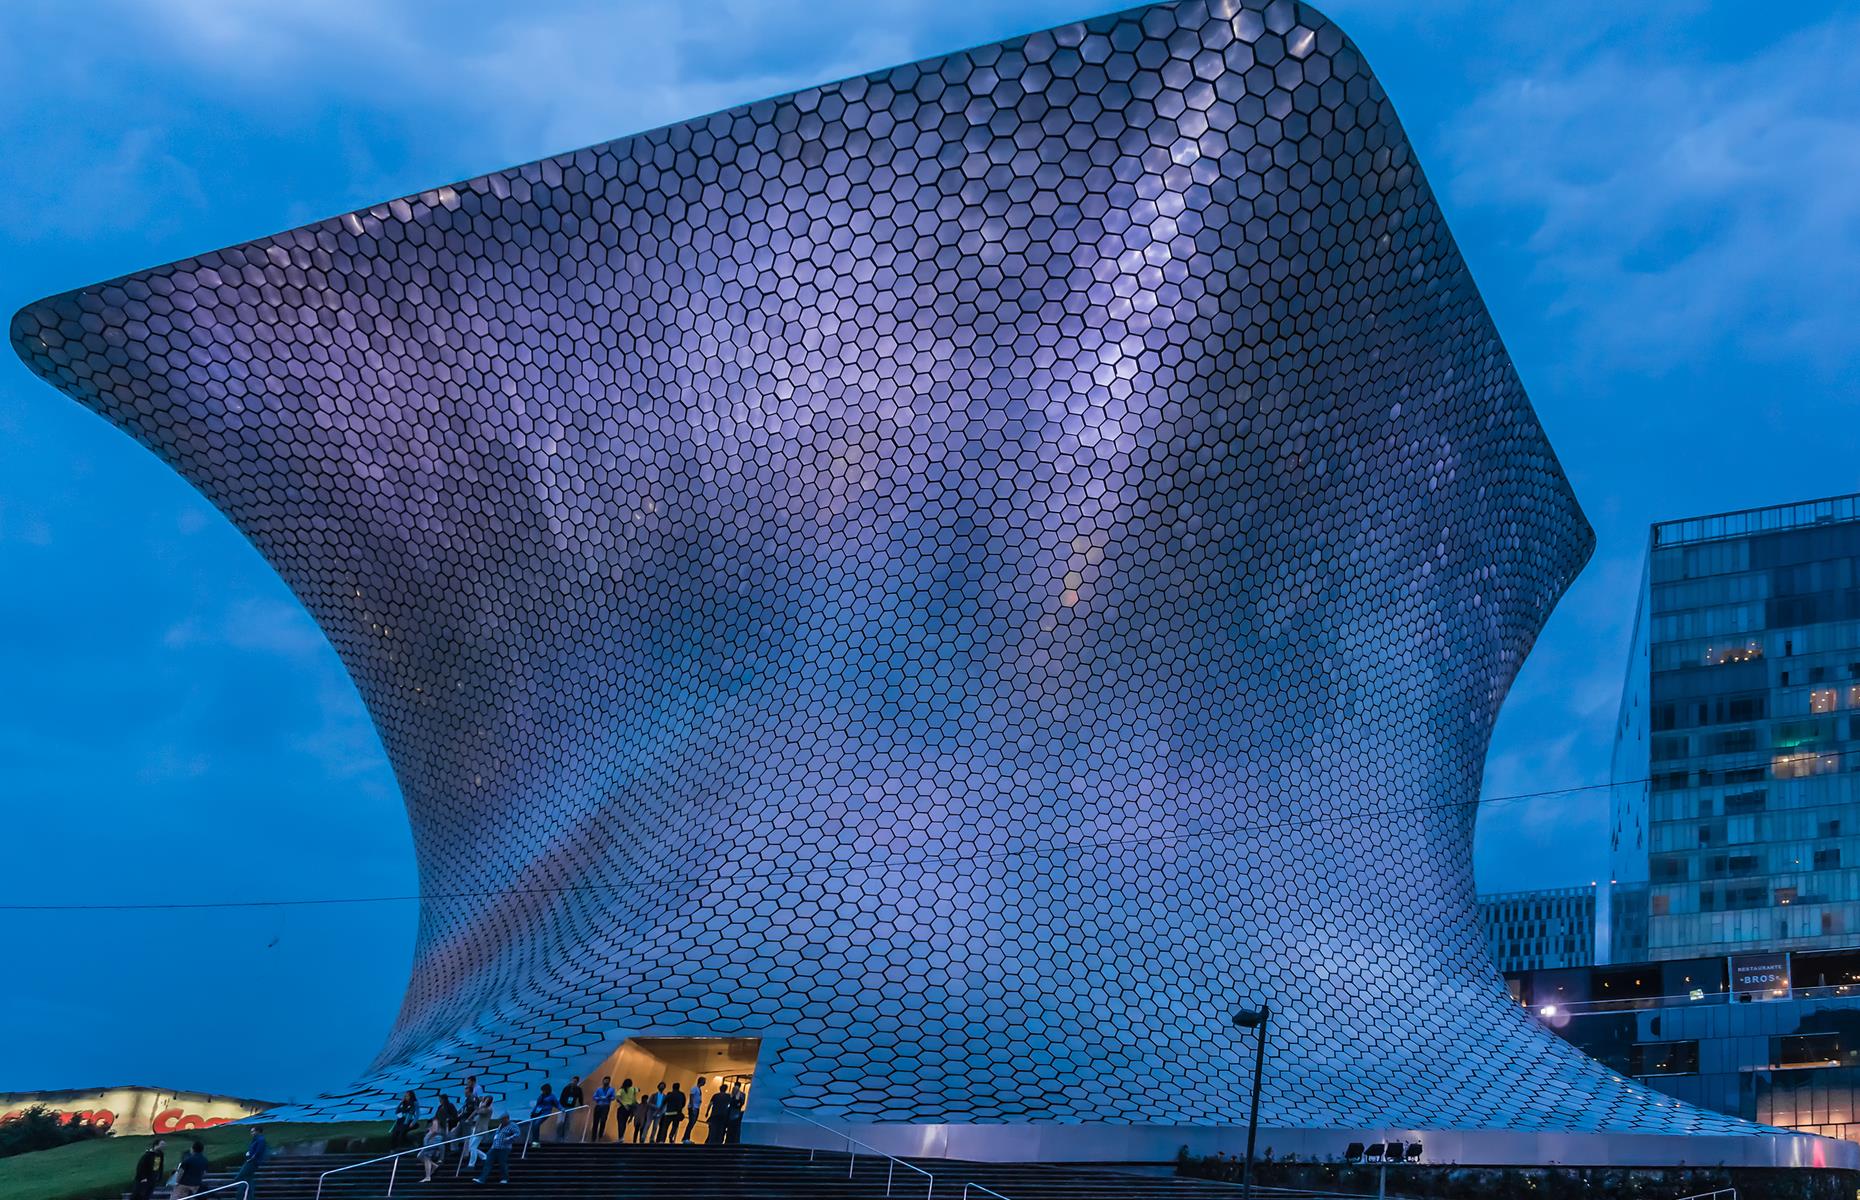 <p>When Museo Soumaya art gallery was completed in 1994, it became an instant landmark of Mexico City and it’s easy to see why. The stunning two-part structure was designed by famed architect Fernando Romero. One of the nation’s most visited buildings, the interior is just as impressive and is home to 66,000 European and Mexican artworks, including pieces by Dali, Monet, Matisse, Picasso and van Gogh.</p>  <p><a href="https://www.loveexploring.com/galleries/89355/the-worlds-most-beautiful-museums?page=1"><strong>These are the world's most beautiful museums</strong></a></p>